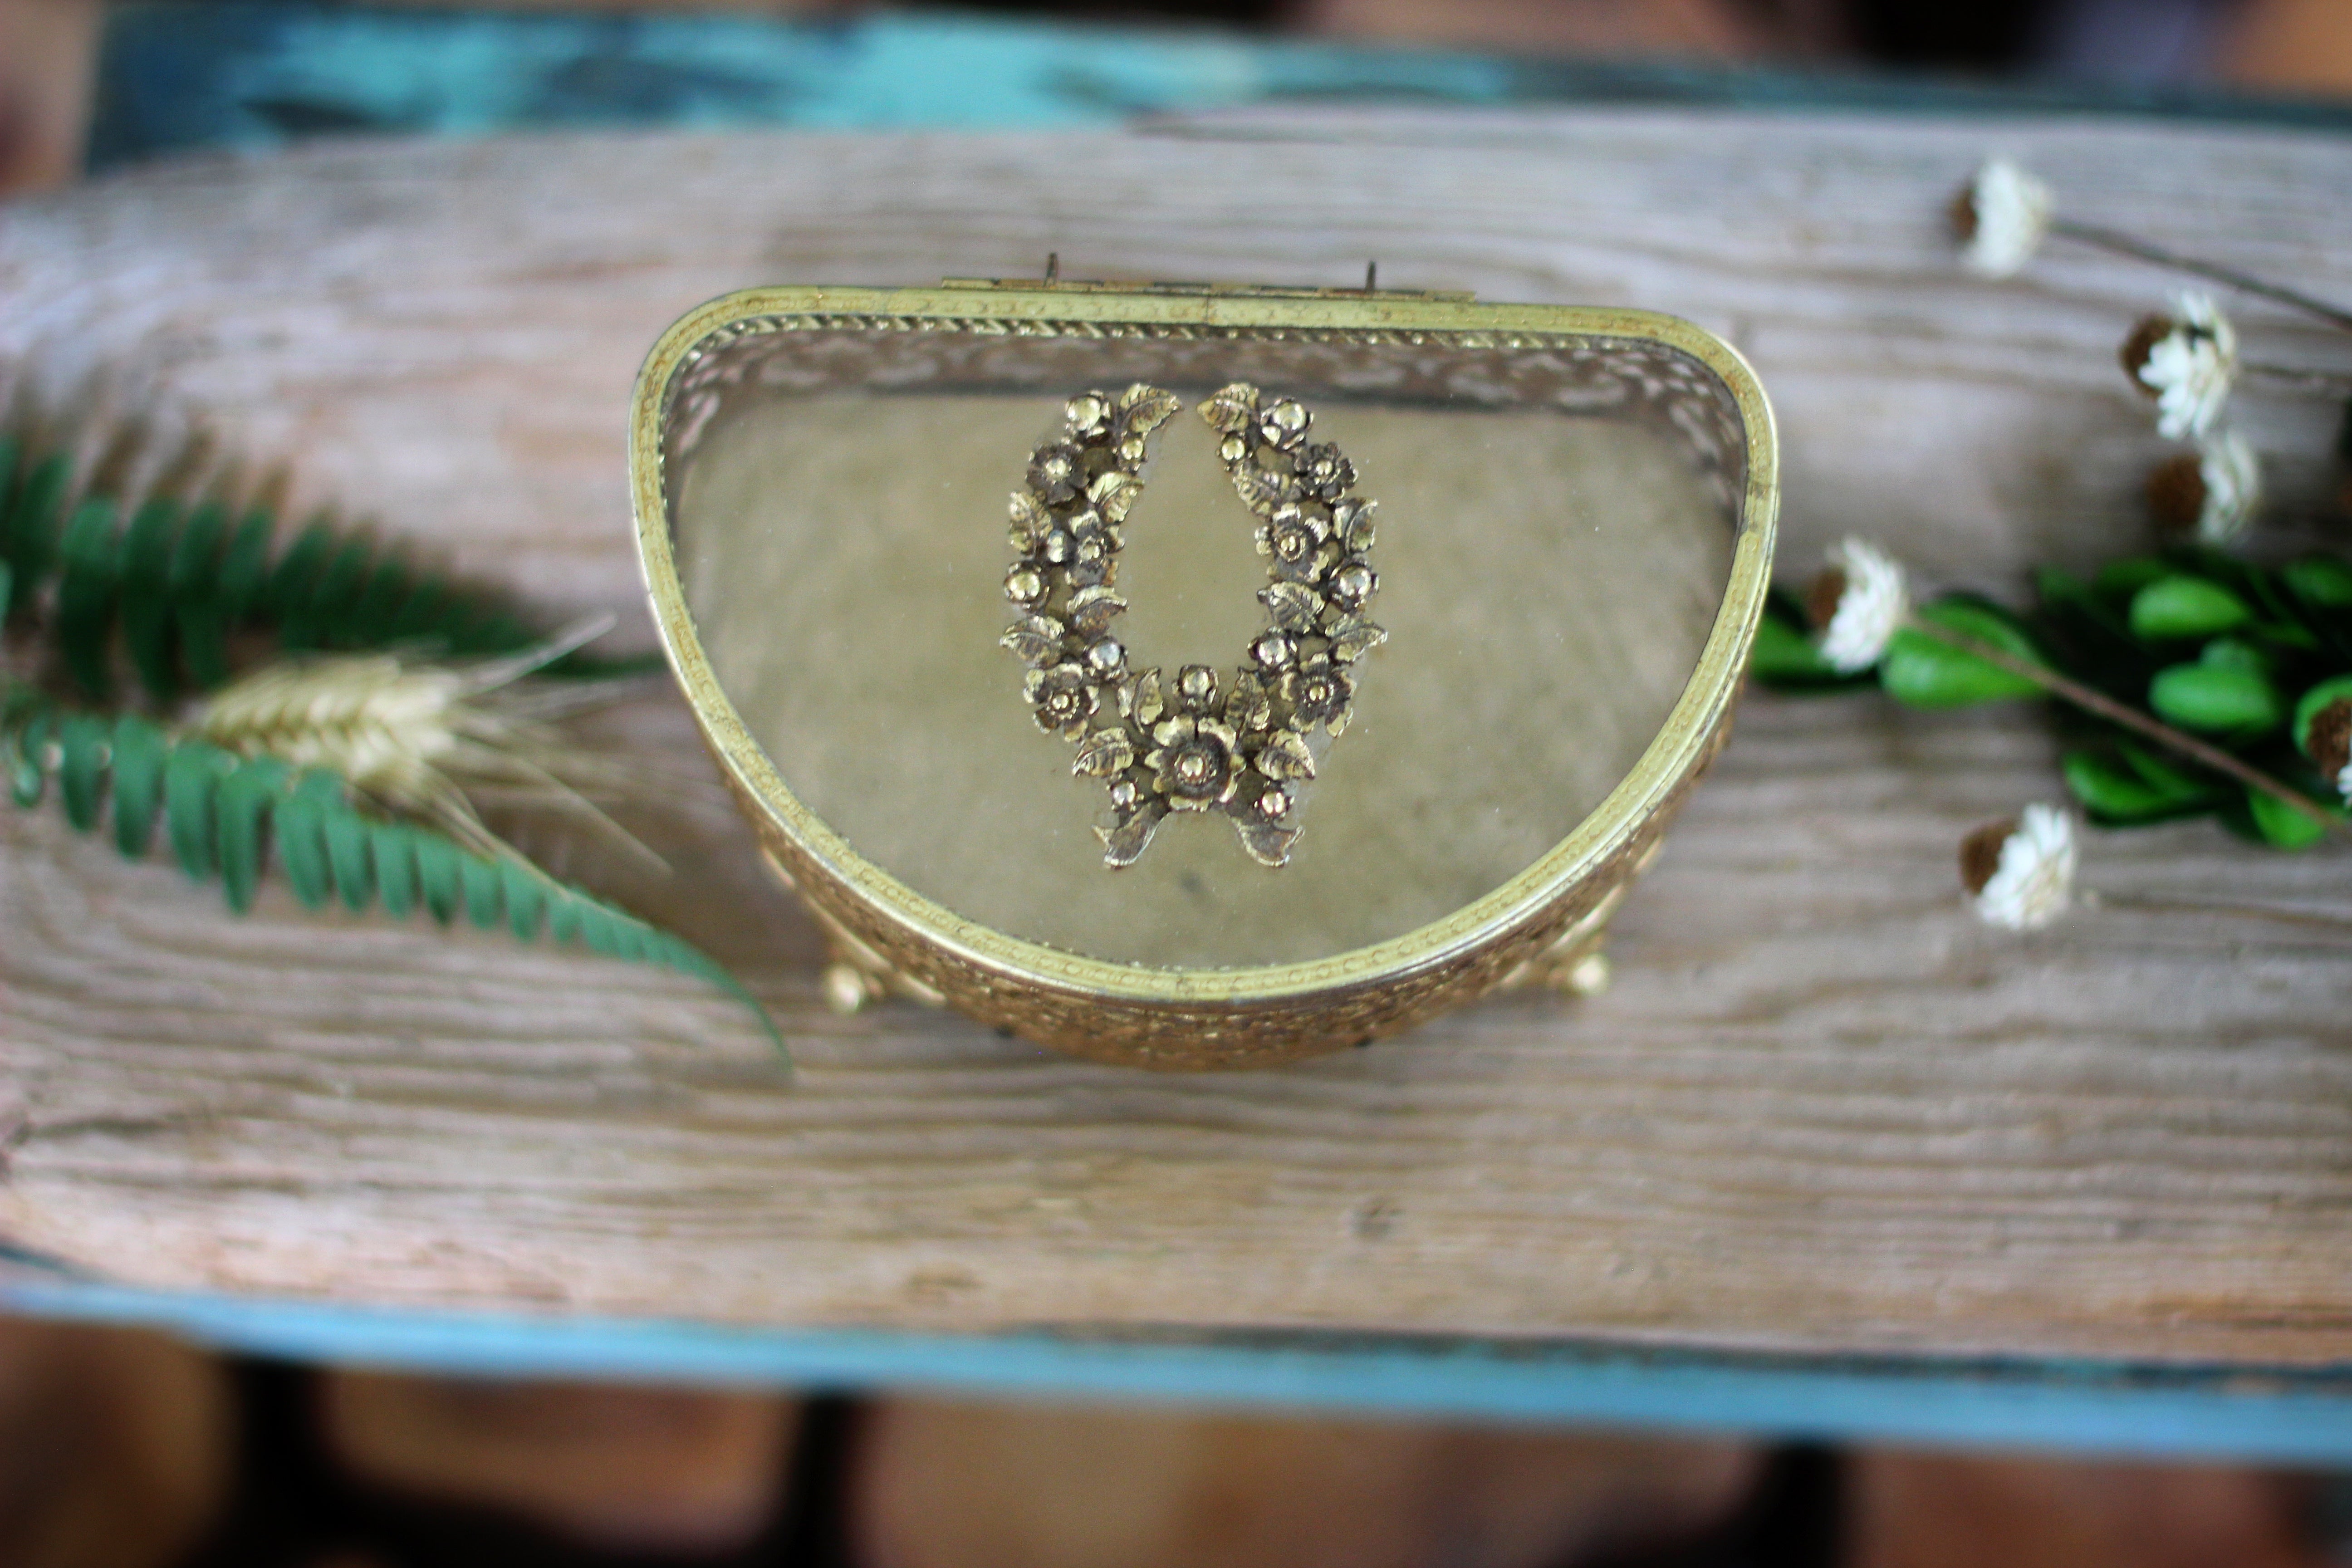 Antique Floral Jewelry Box